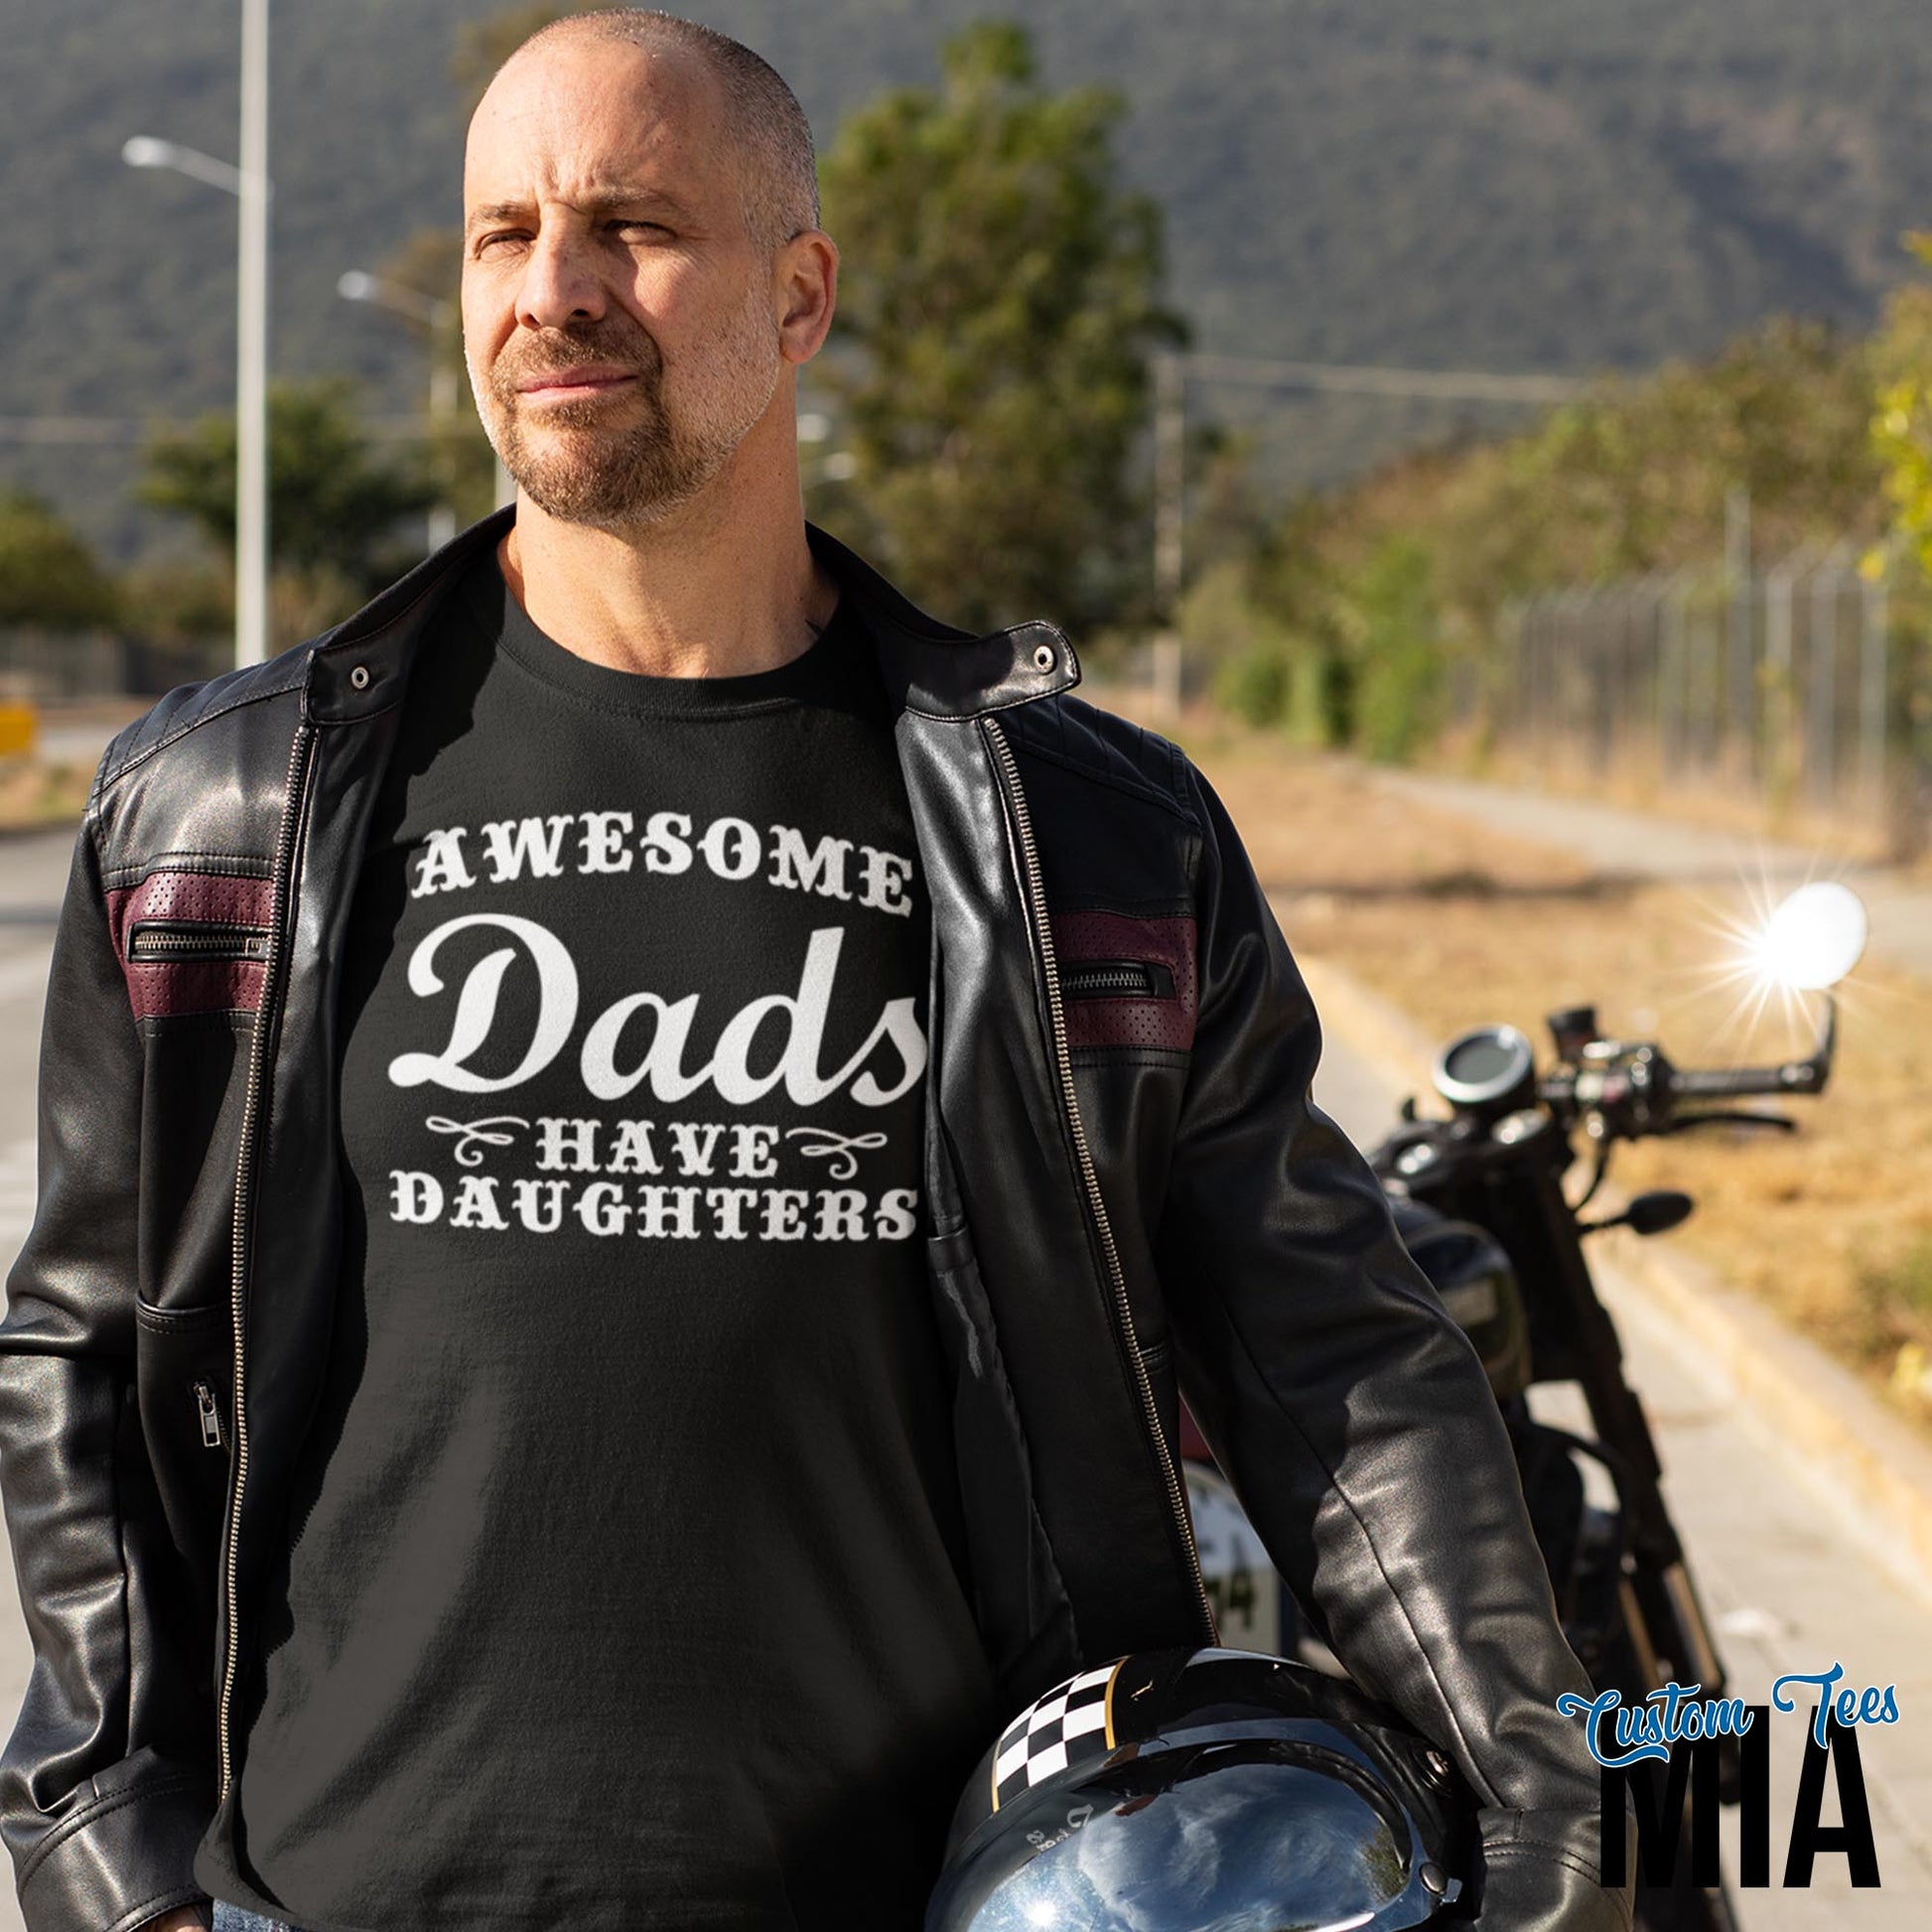 Awesome Dads Have Daughters Shirt - Custom Tees MIA